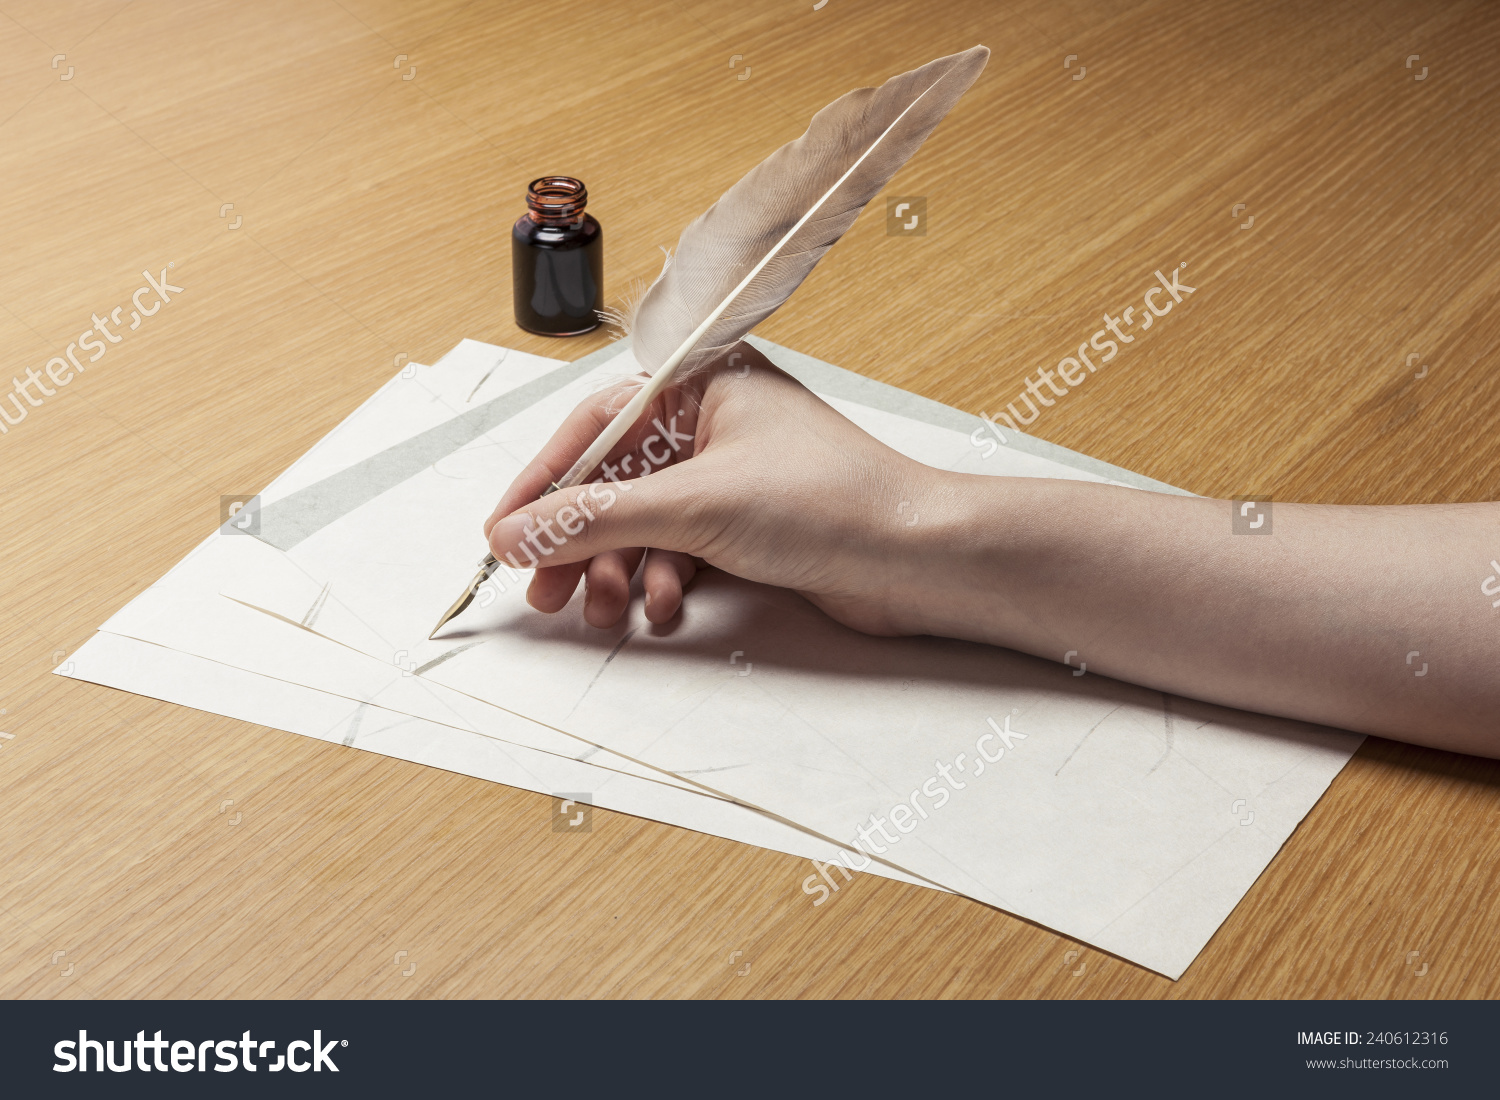 stock-photo-a-female-woman-hand-hold-write-a-feather-quill-pen-with-ink-on-the-letter-paper-and-wood-desk-240612316